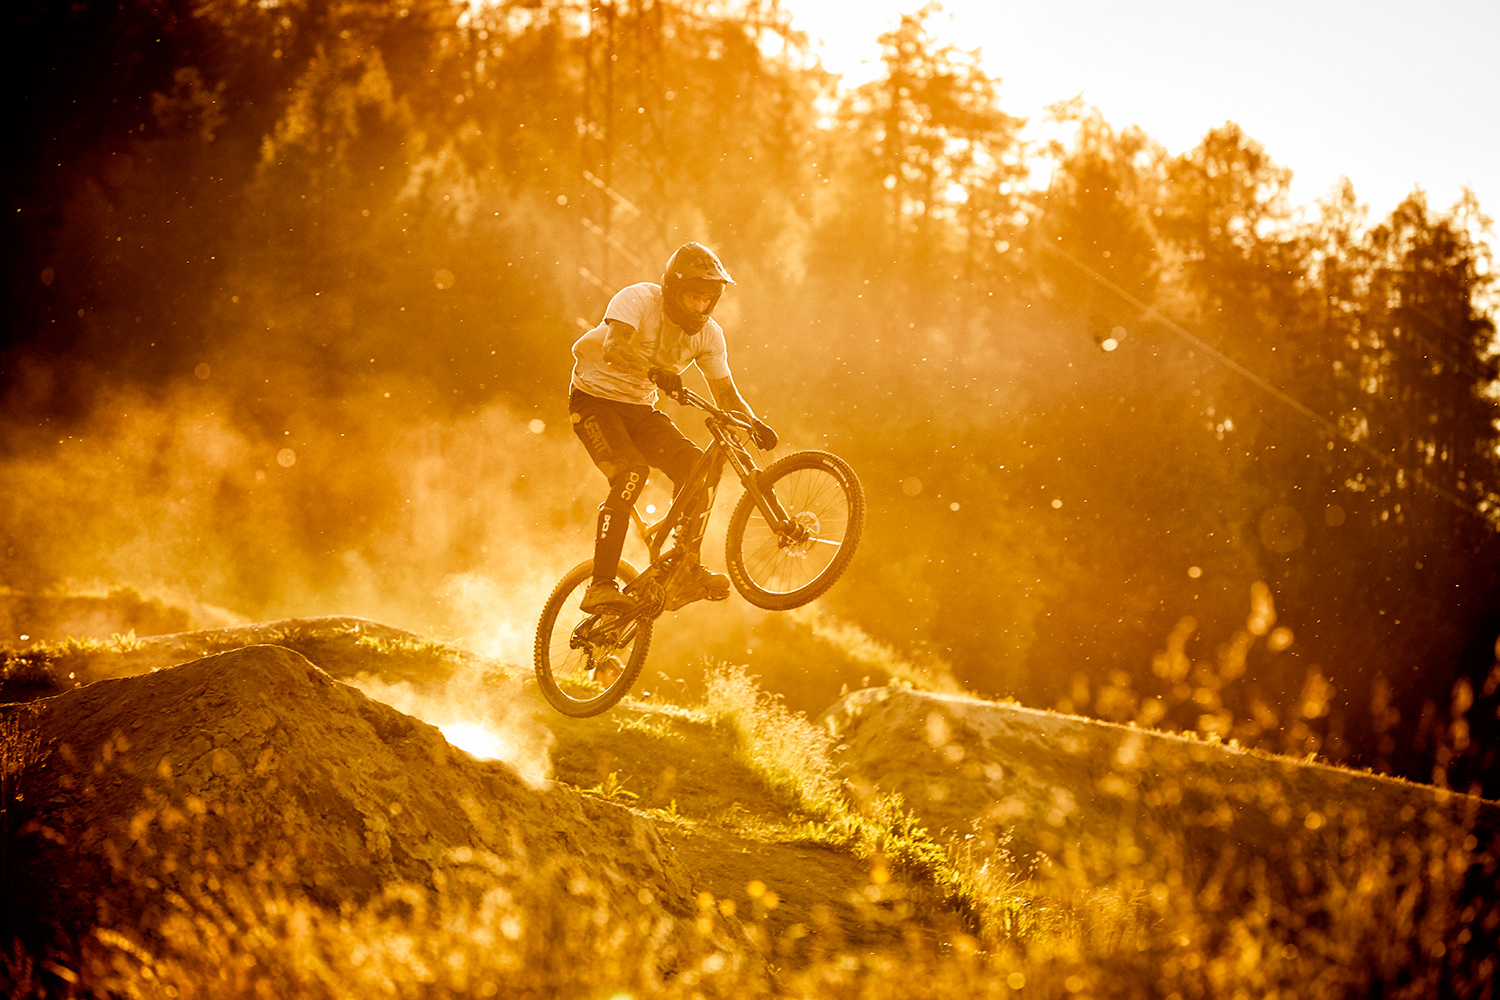 MTB athlete jumping in the sunset with dust flying at Innsbruck bike park